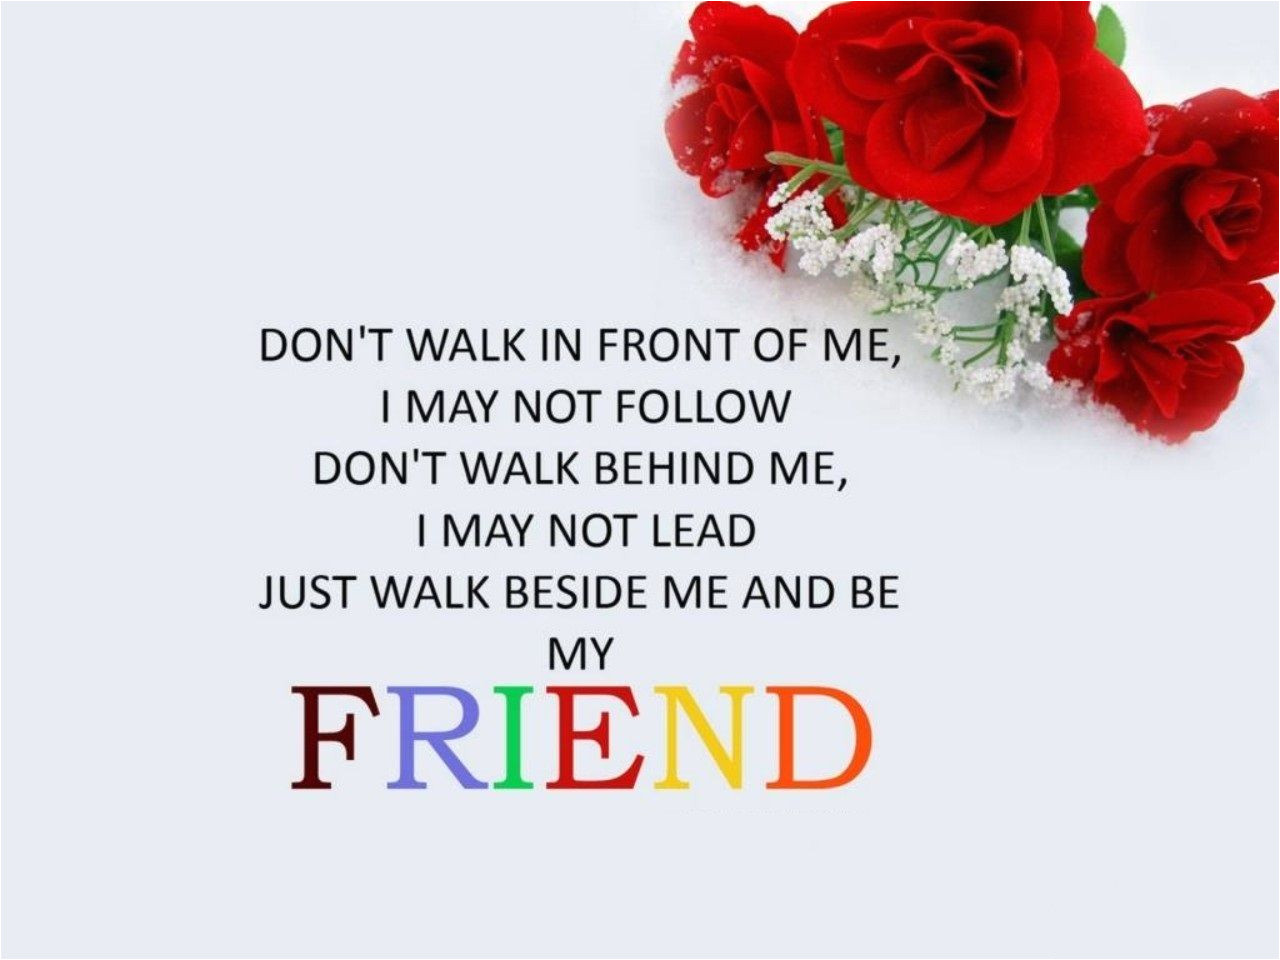 Greeting Card Quotes for Friends Wise Quote Happy Friendship Day Greeting Card Template Red